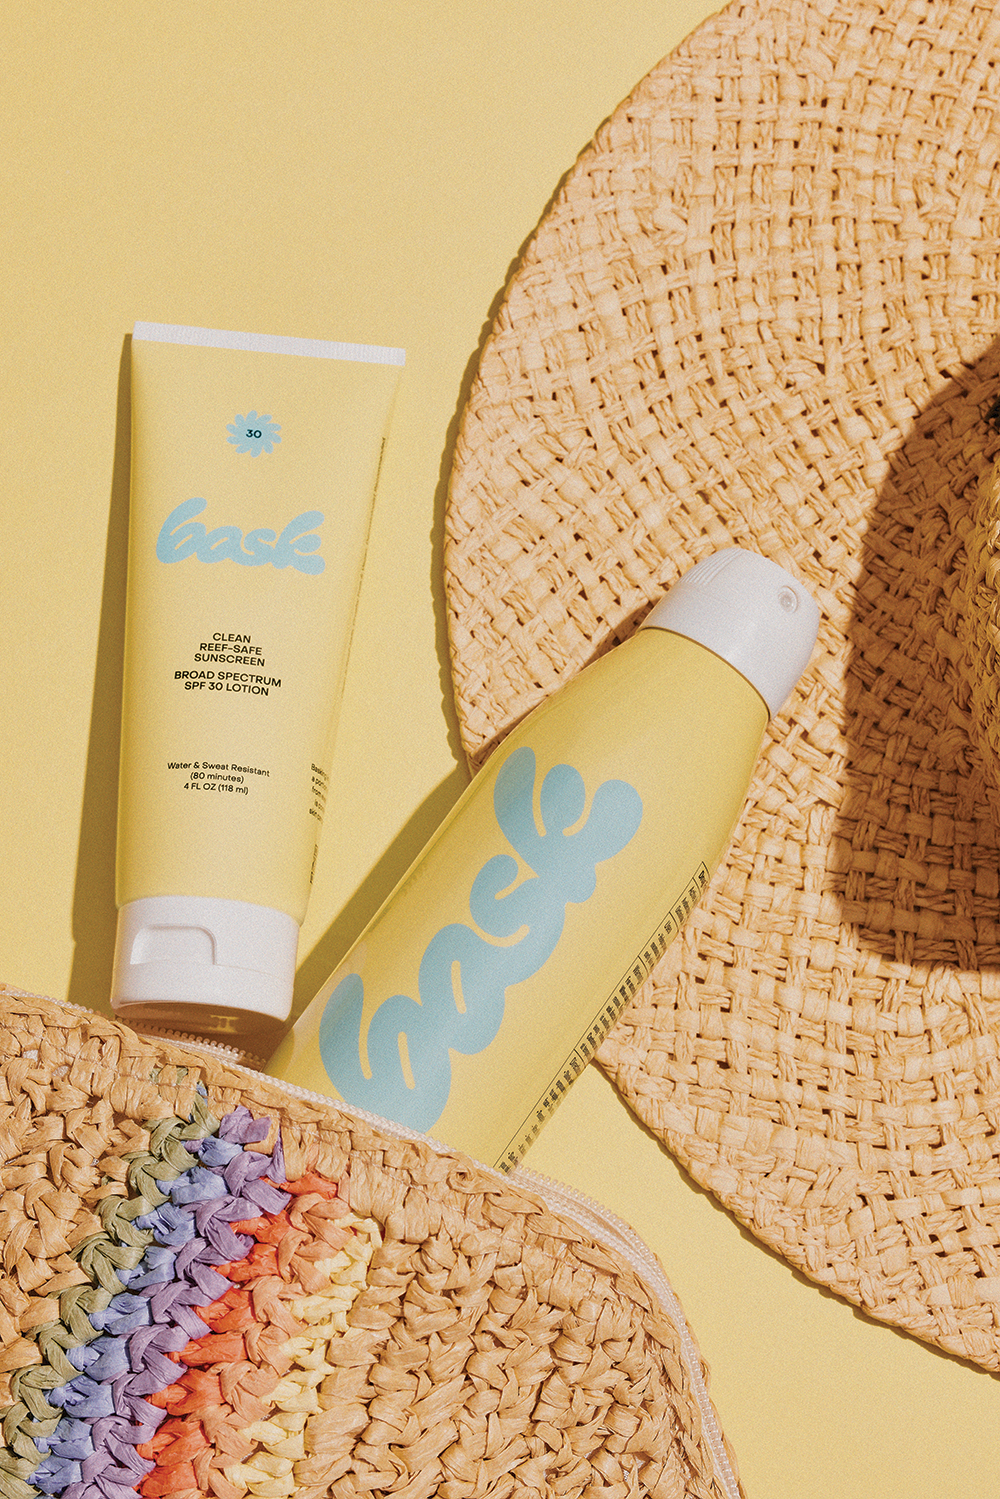 Some Sunscreen and Sun-Safety Tips from Bask